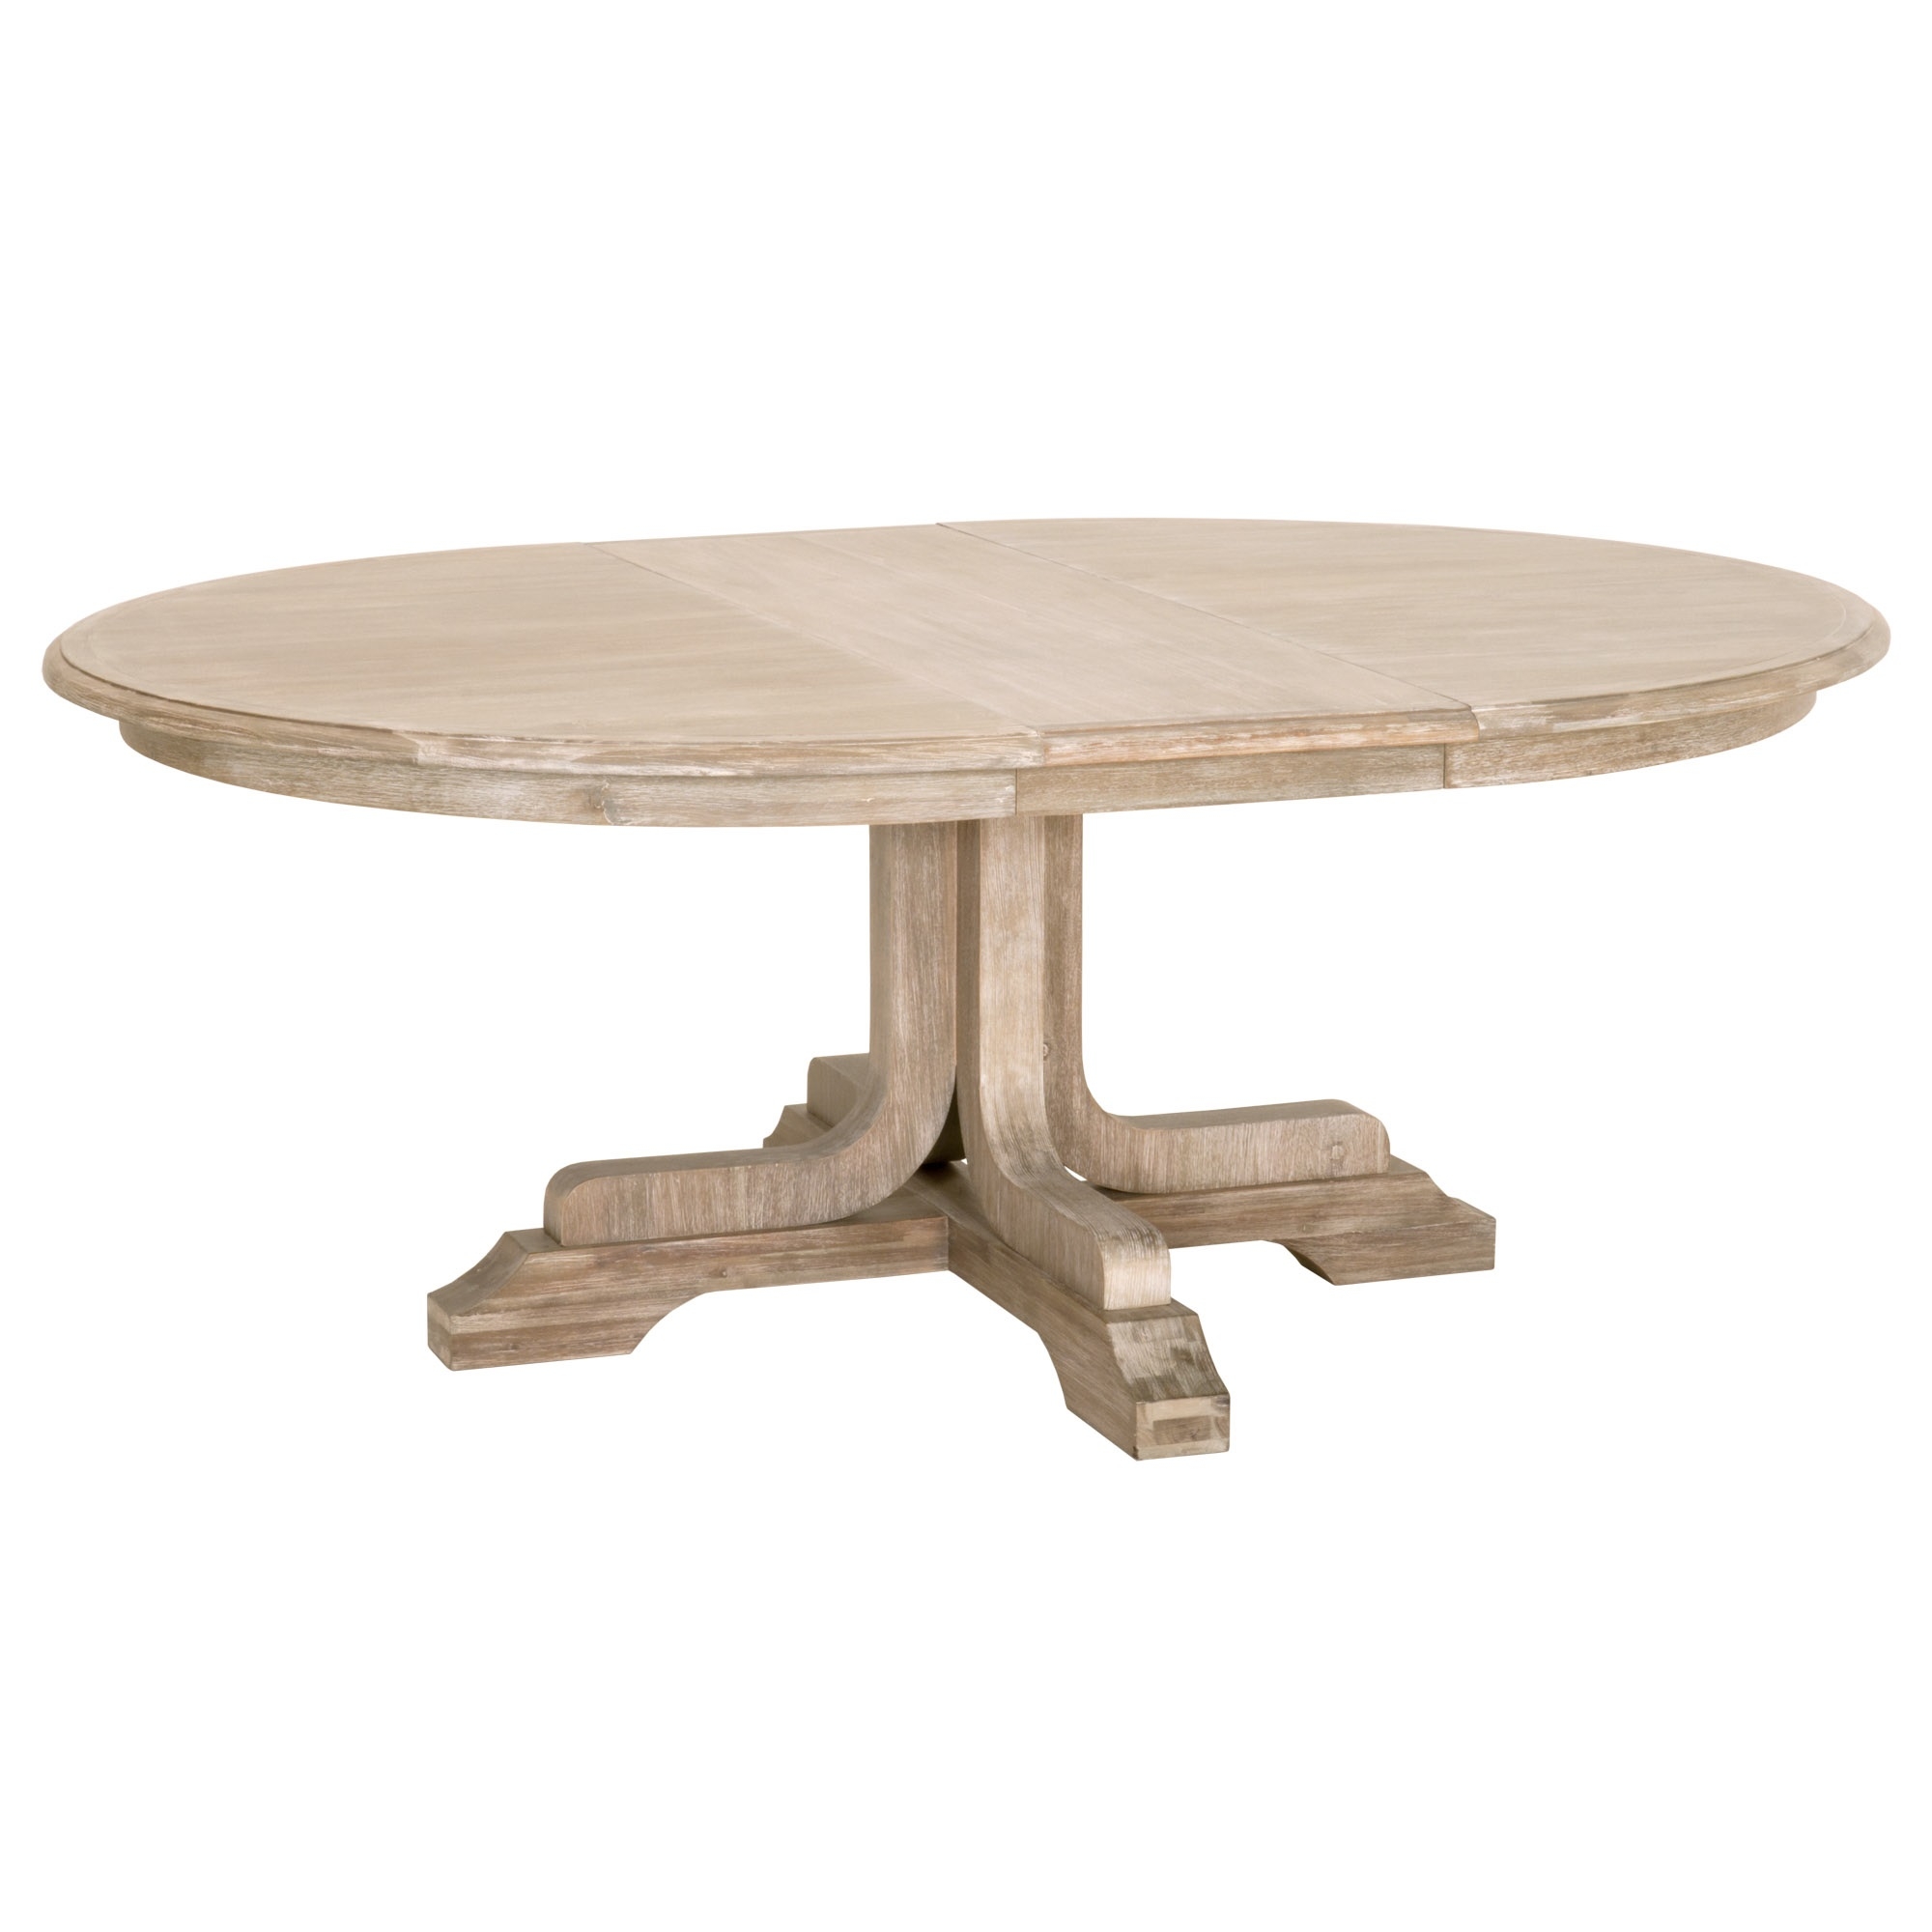 Torrey 60" Round Extension Dining Table - Image 2